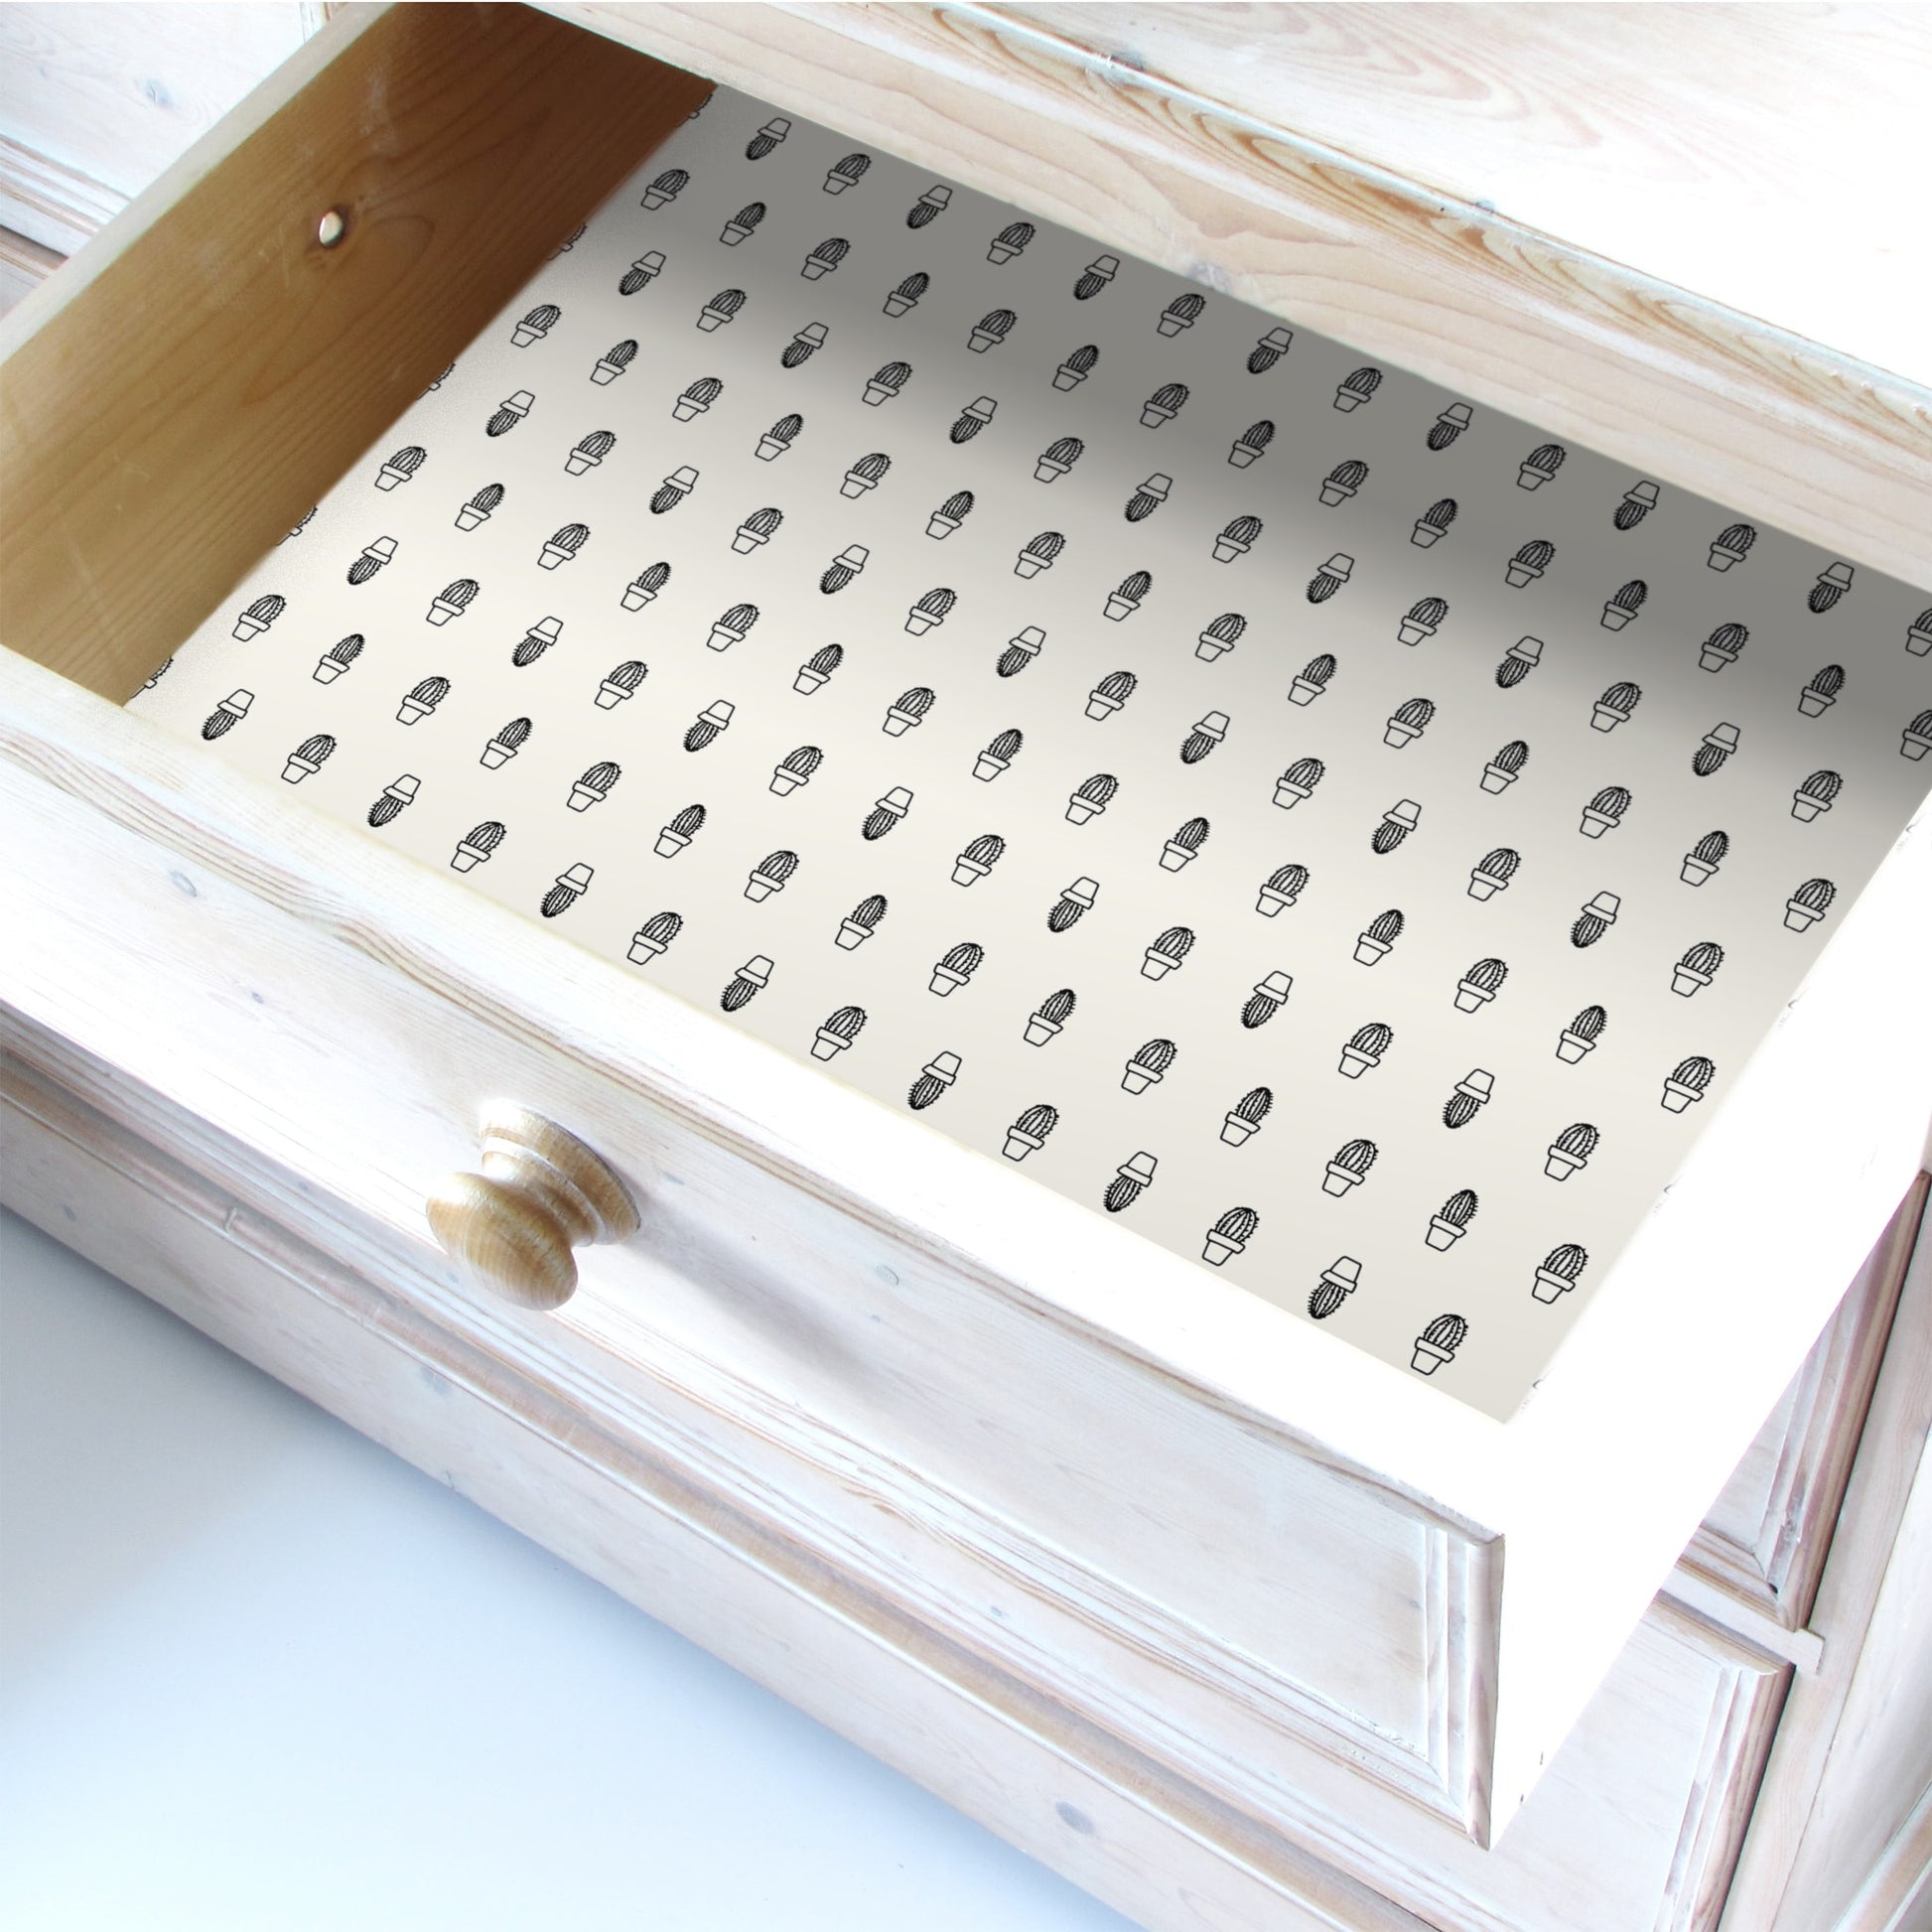 SIMPLY DRAWER LINERS | Wipe Clean & Unscented Drawer Liners with a CACTUS Design.  Perfect for Drawers, Shelves, Cupboards & Cabinets.